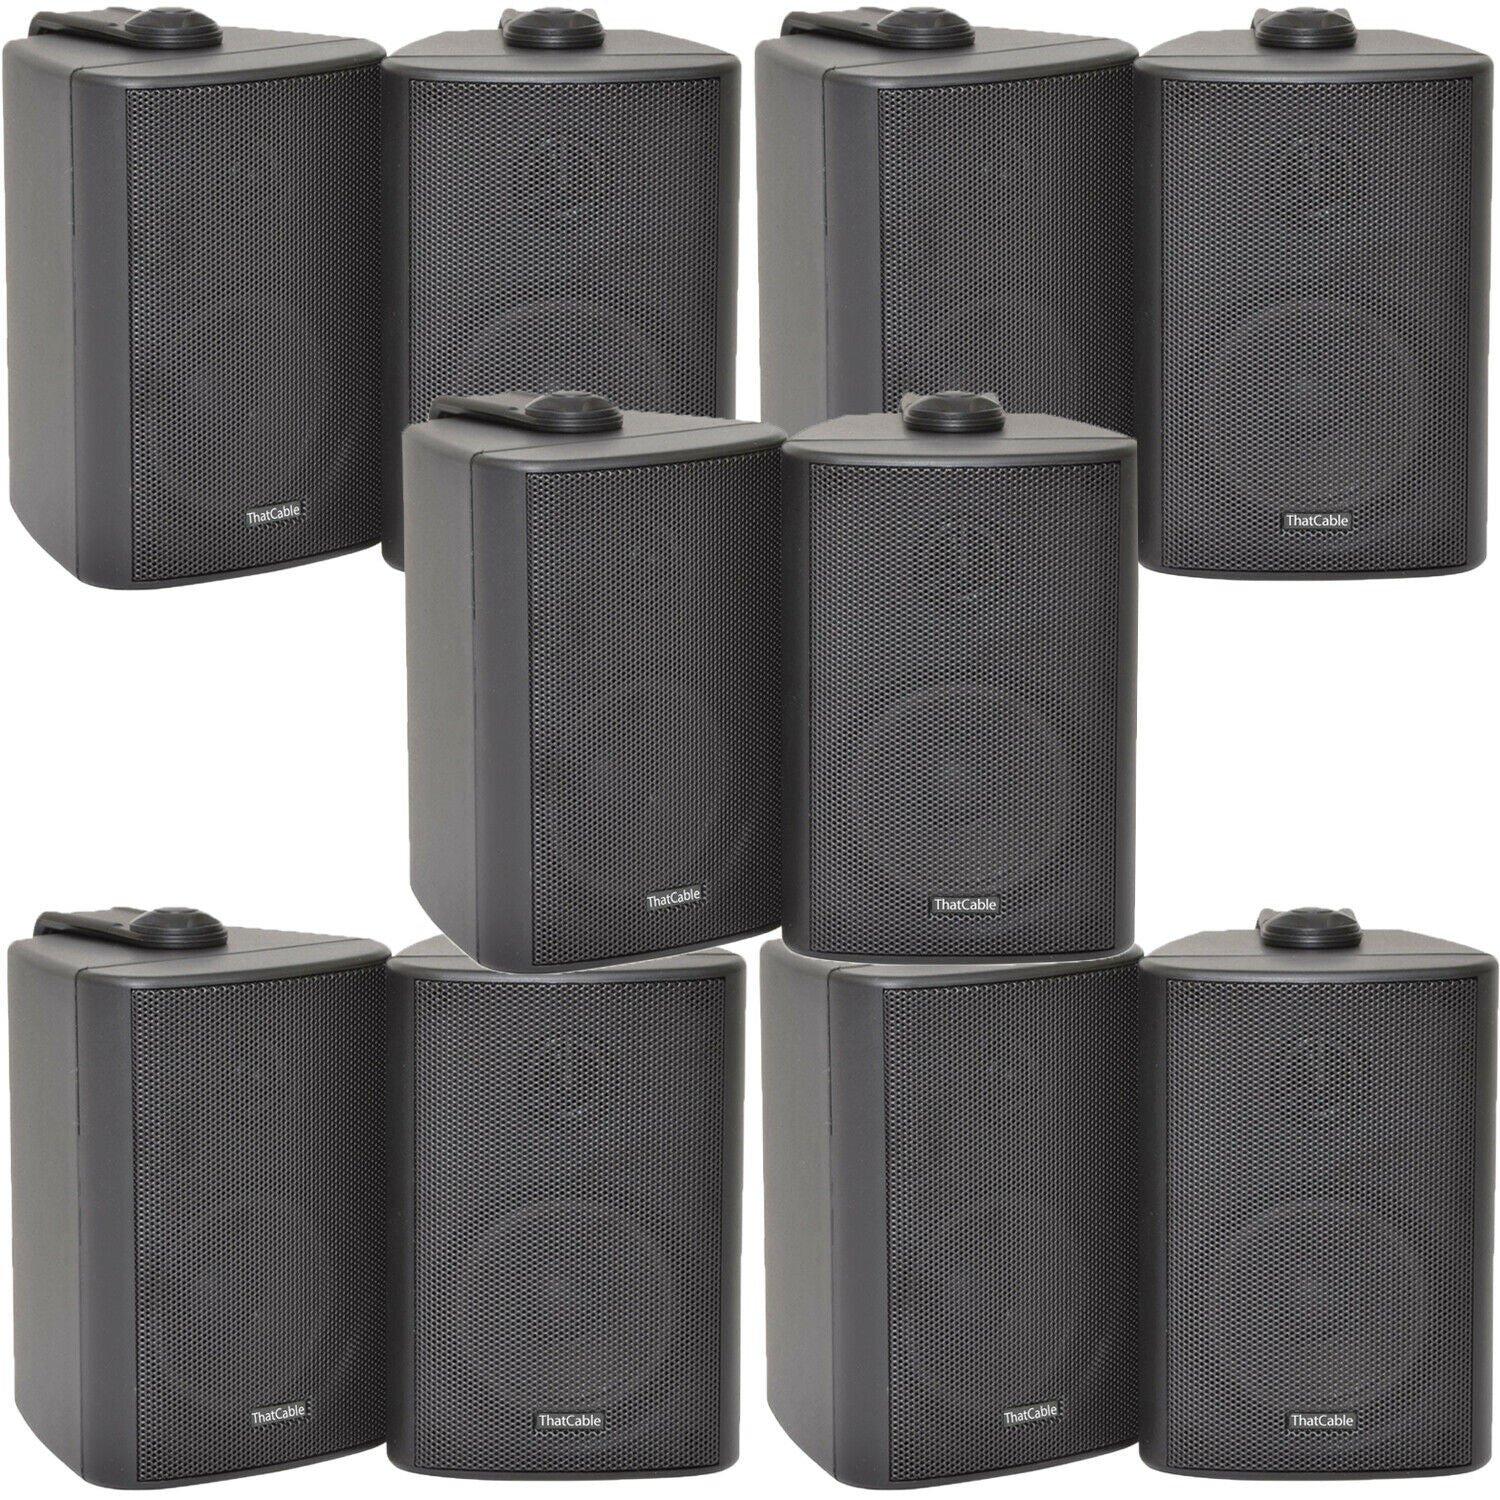 10x 120W Black Wall Mounted Stereo Speakers 6.5